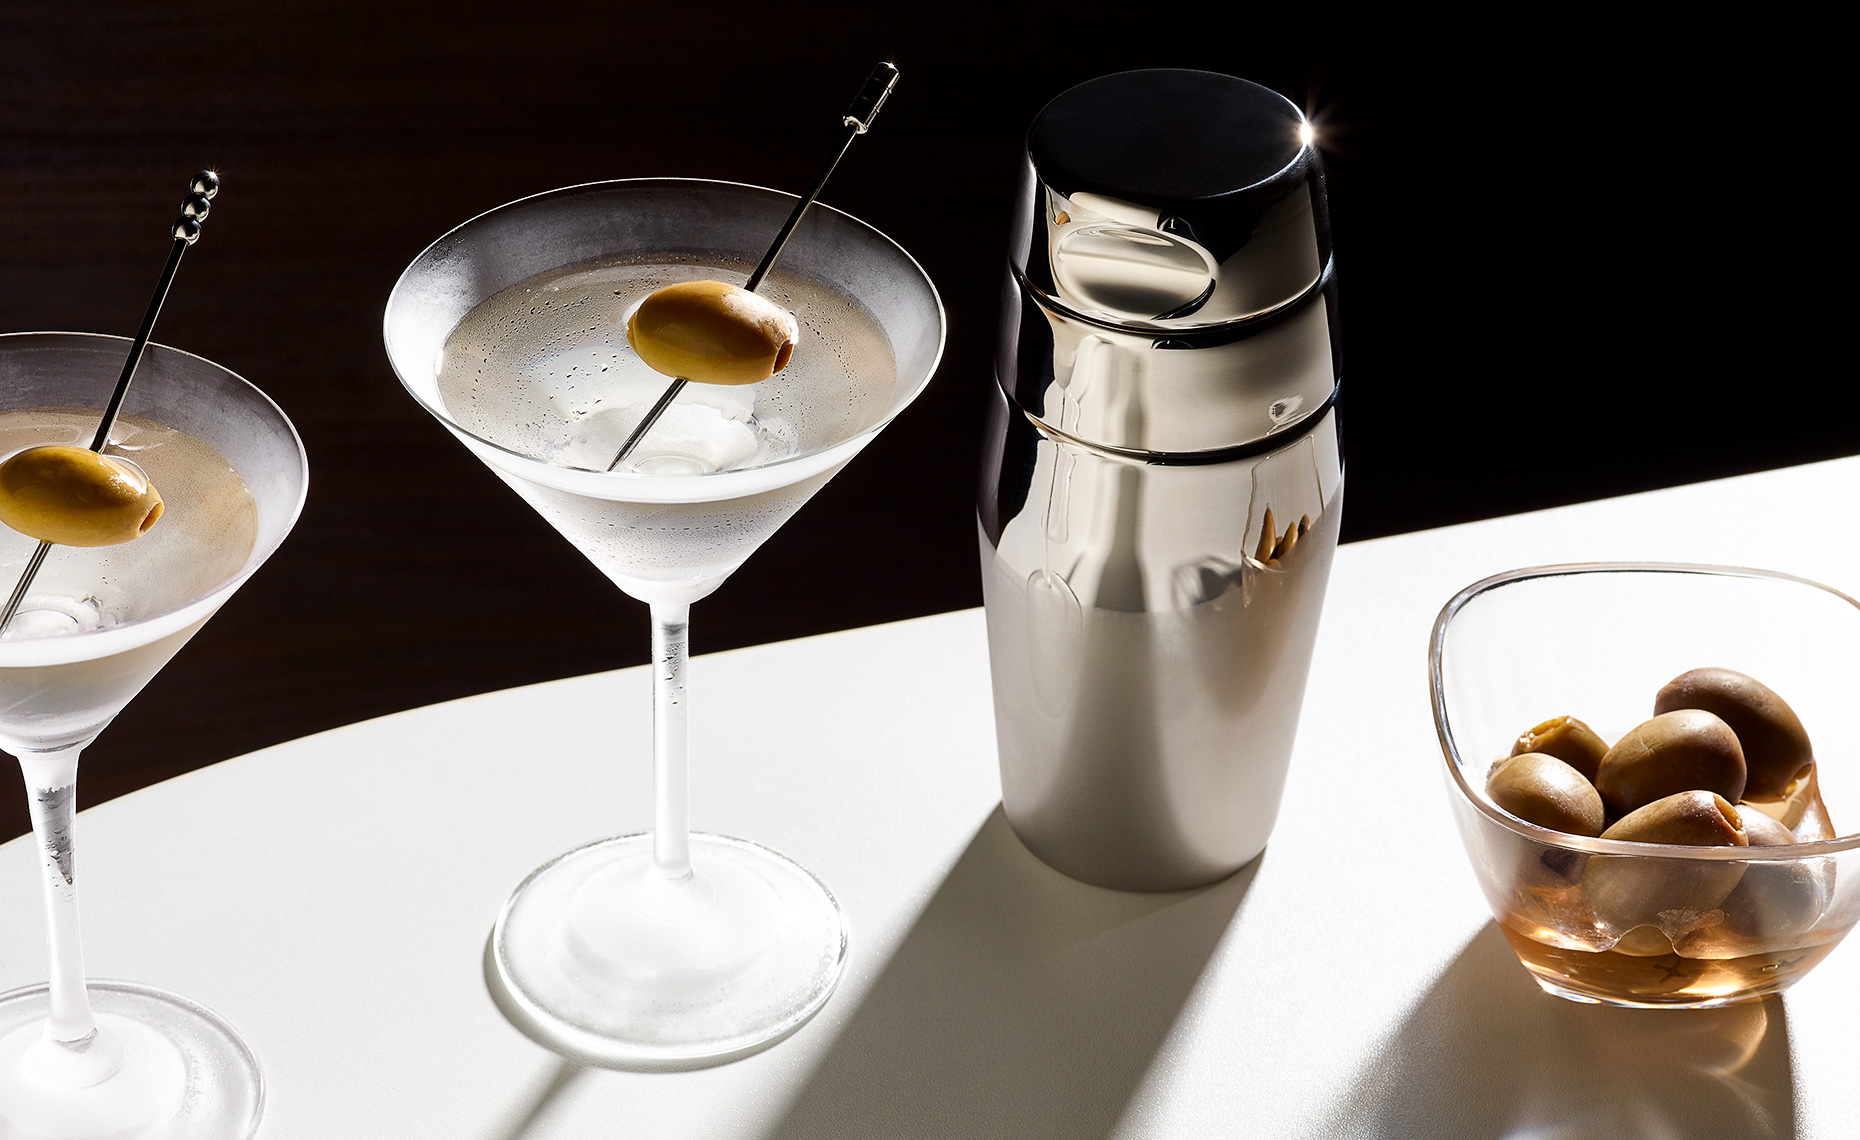 Two martinis with olives and shaker